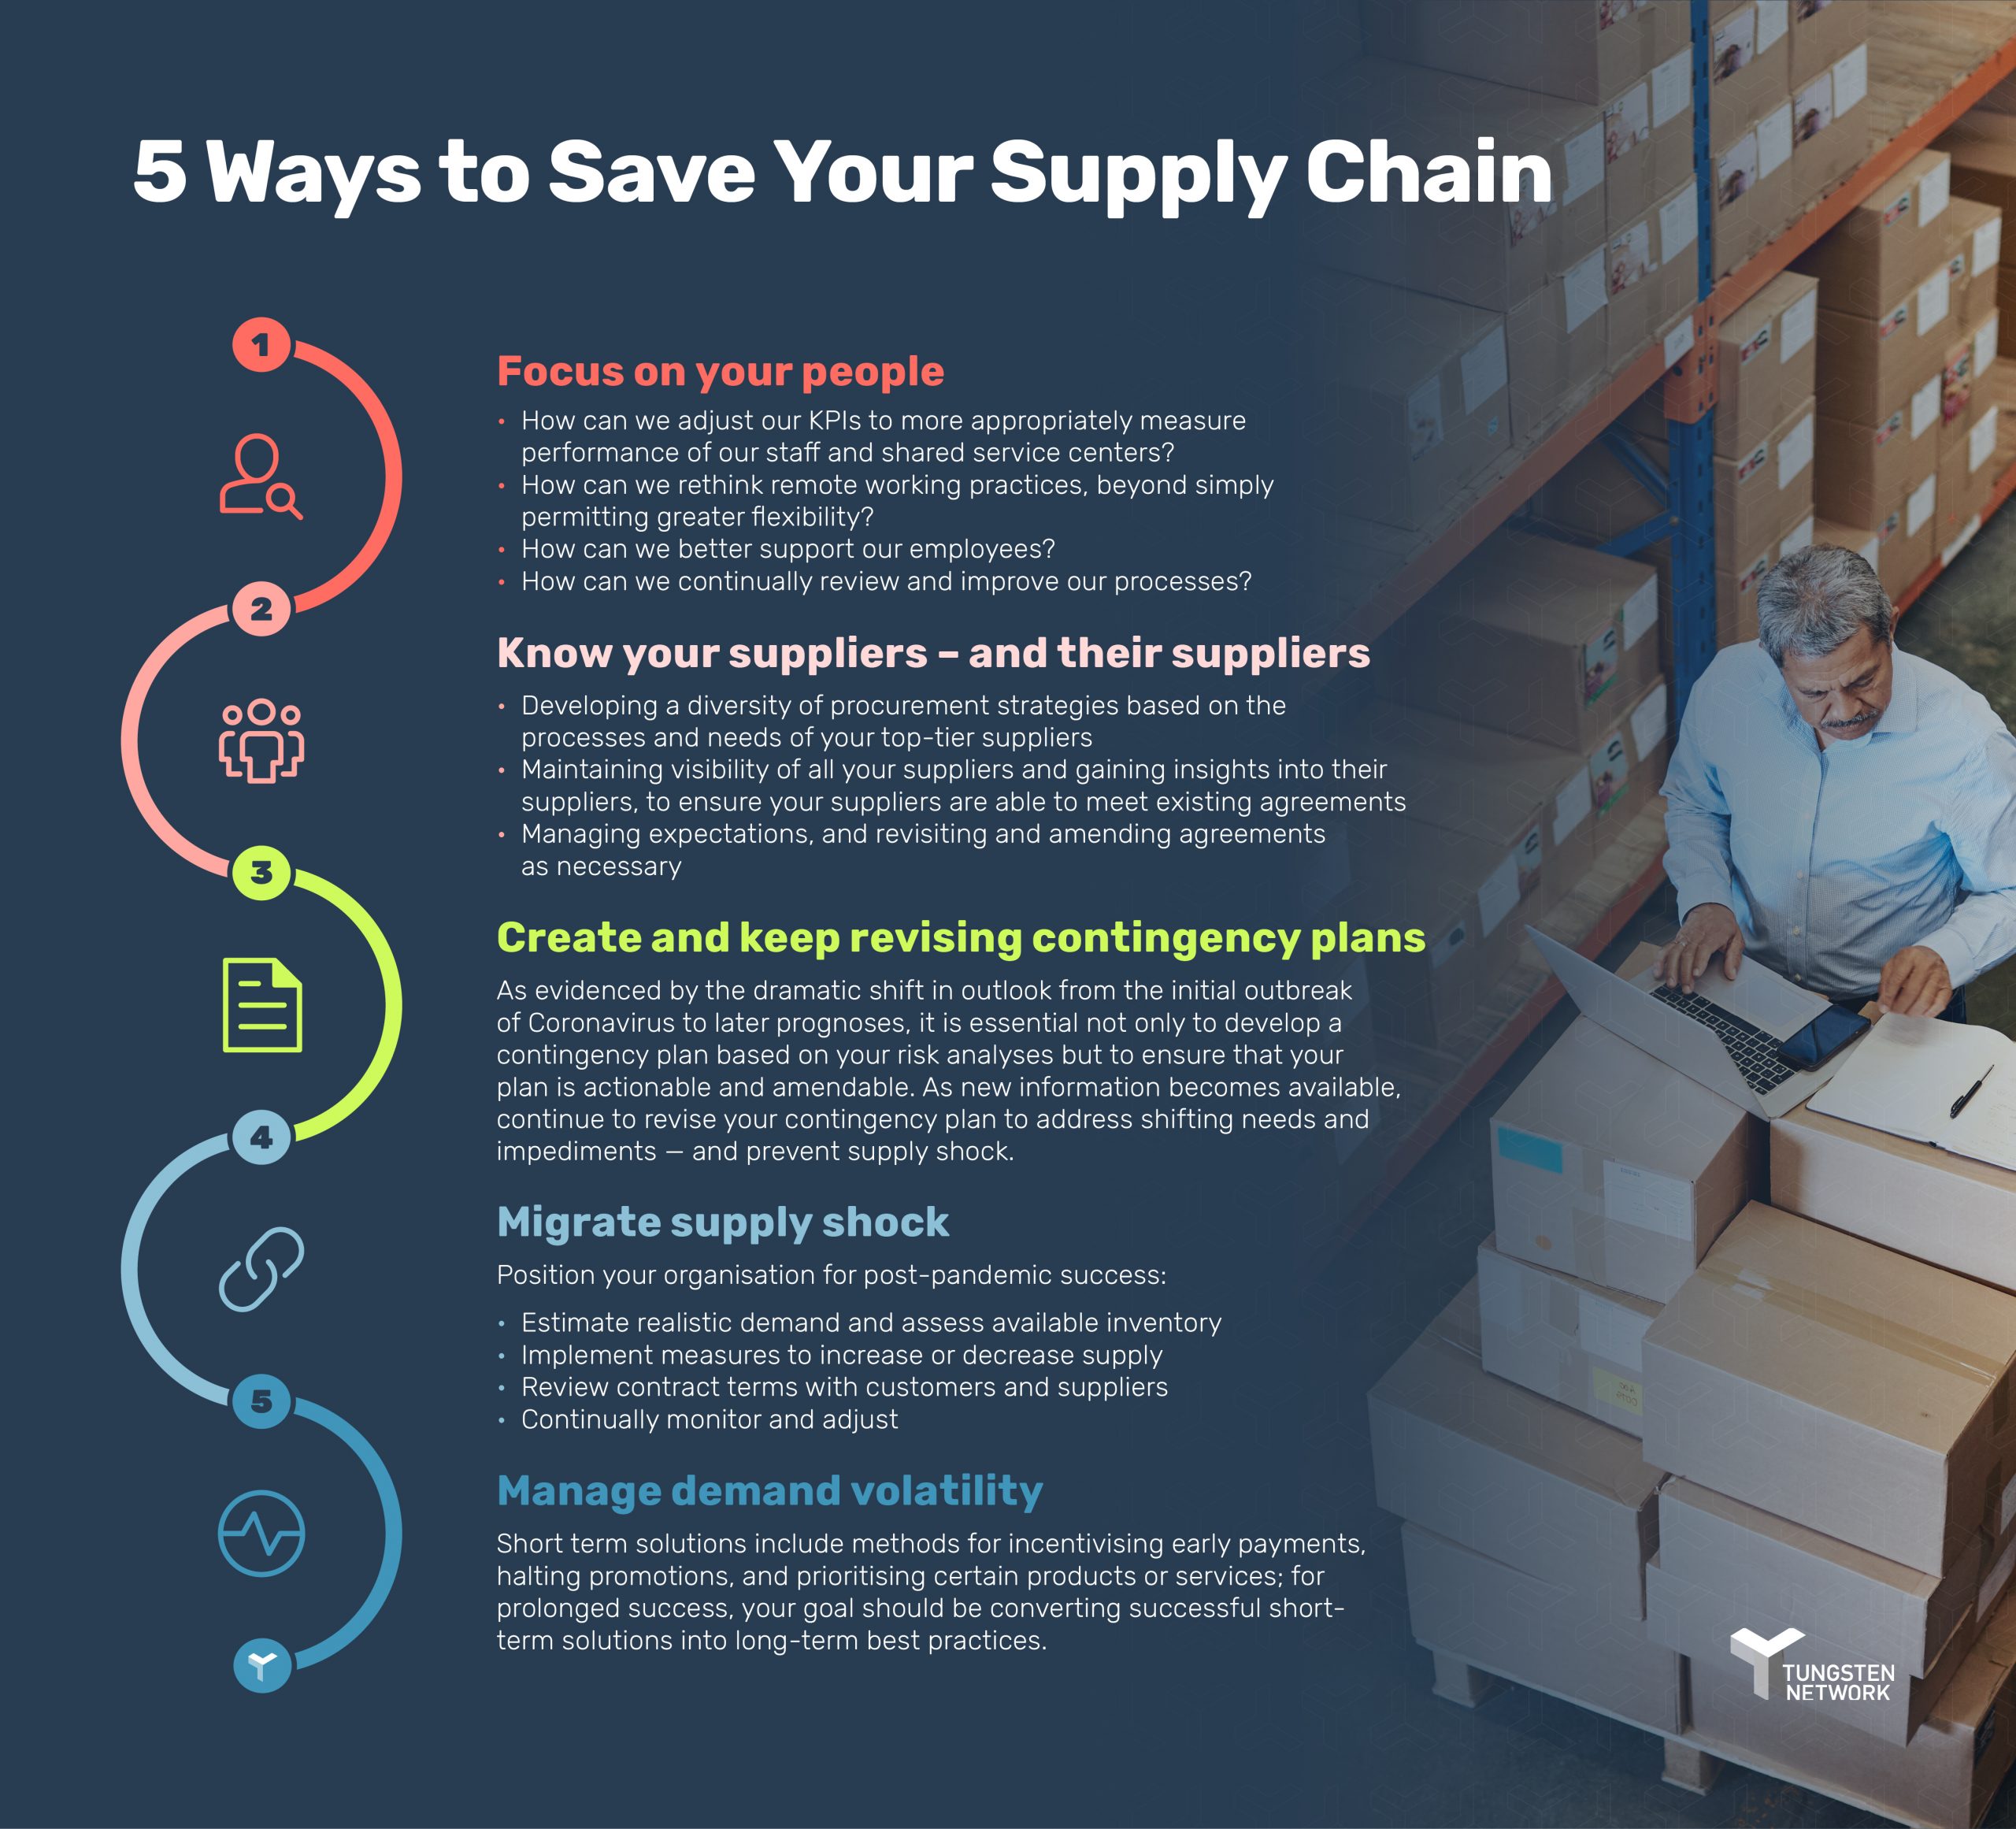 5 ways to save your supply chain infographic - covid-19 - Tungsten Network